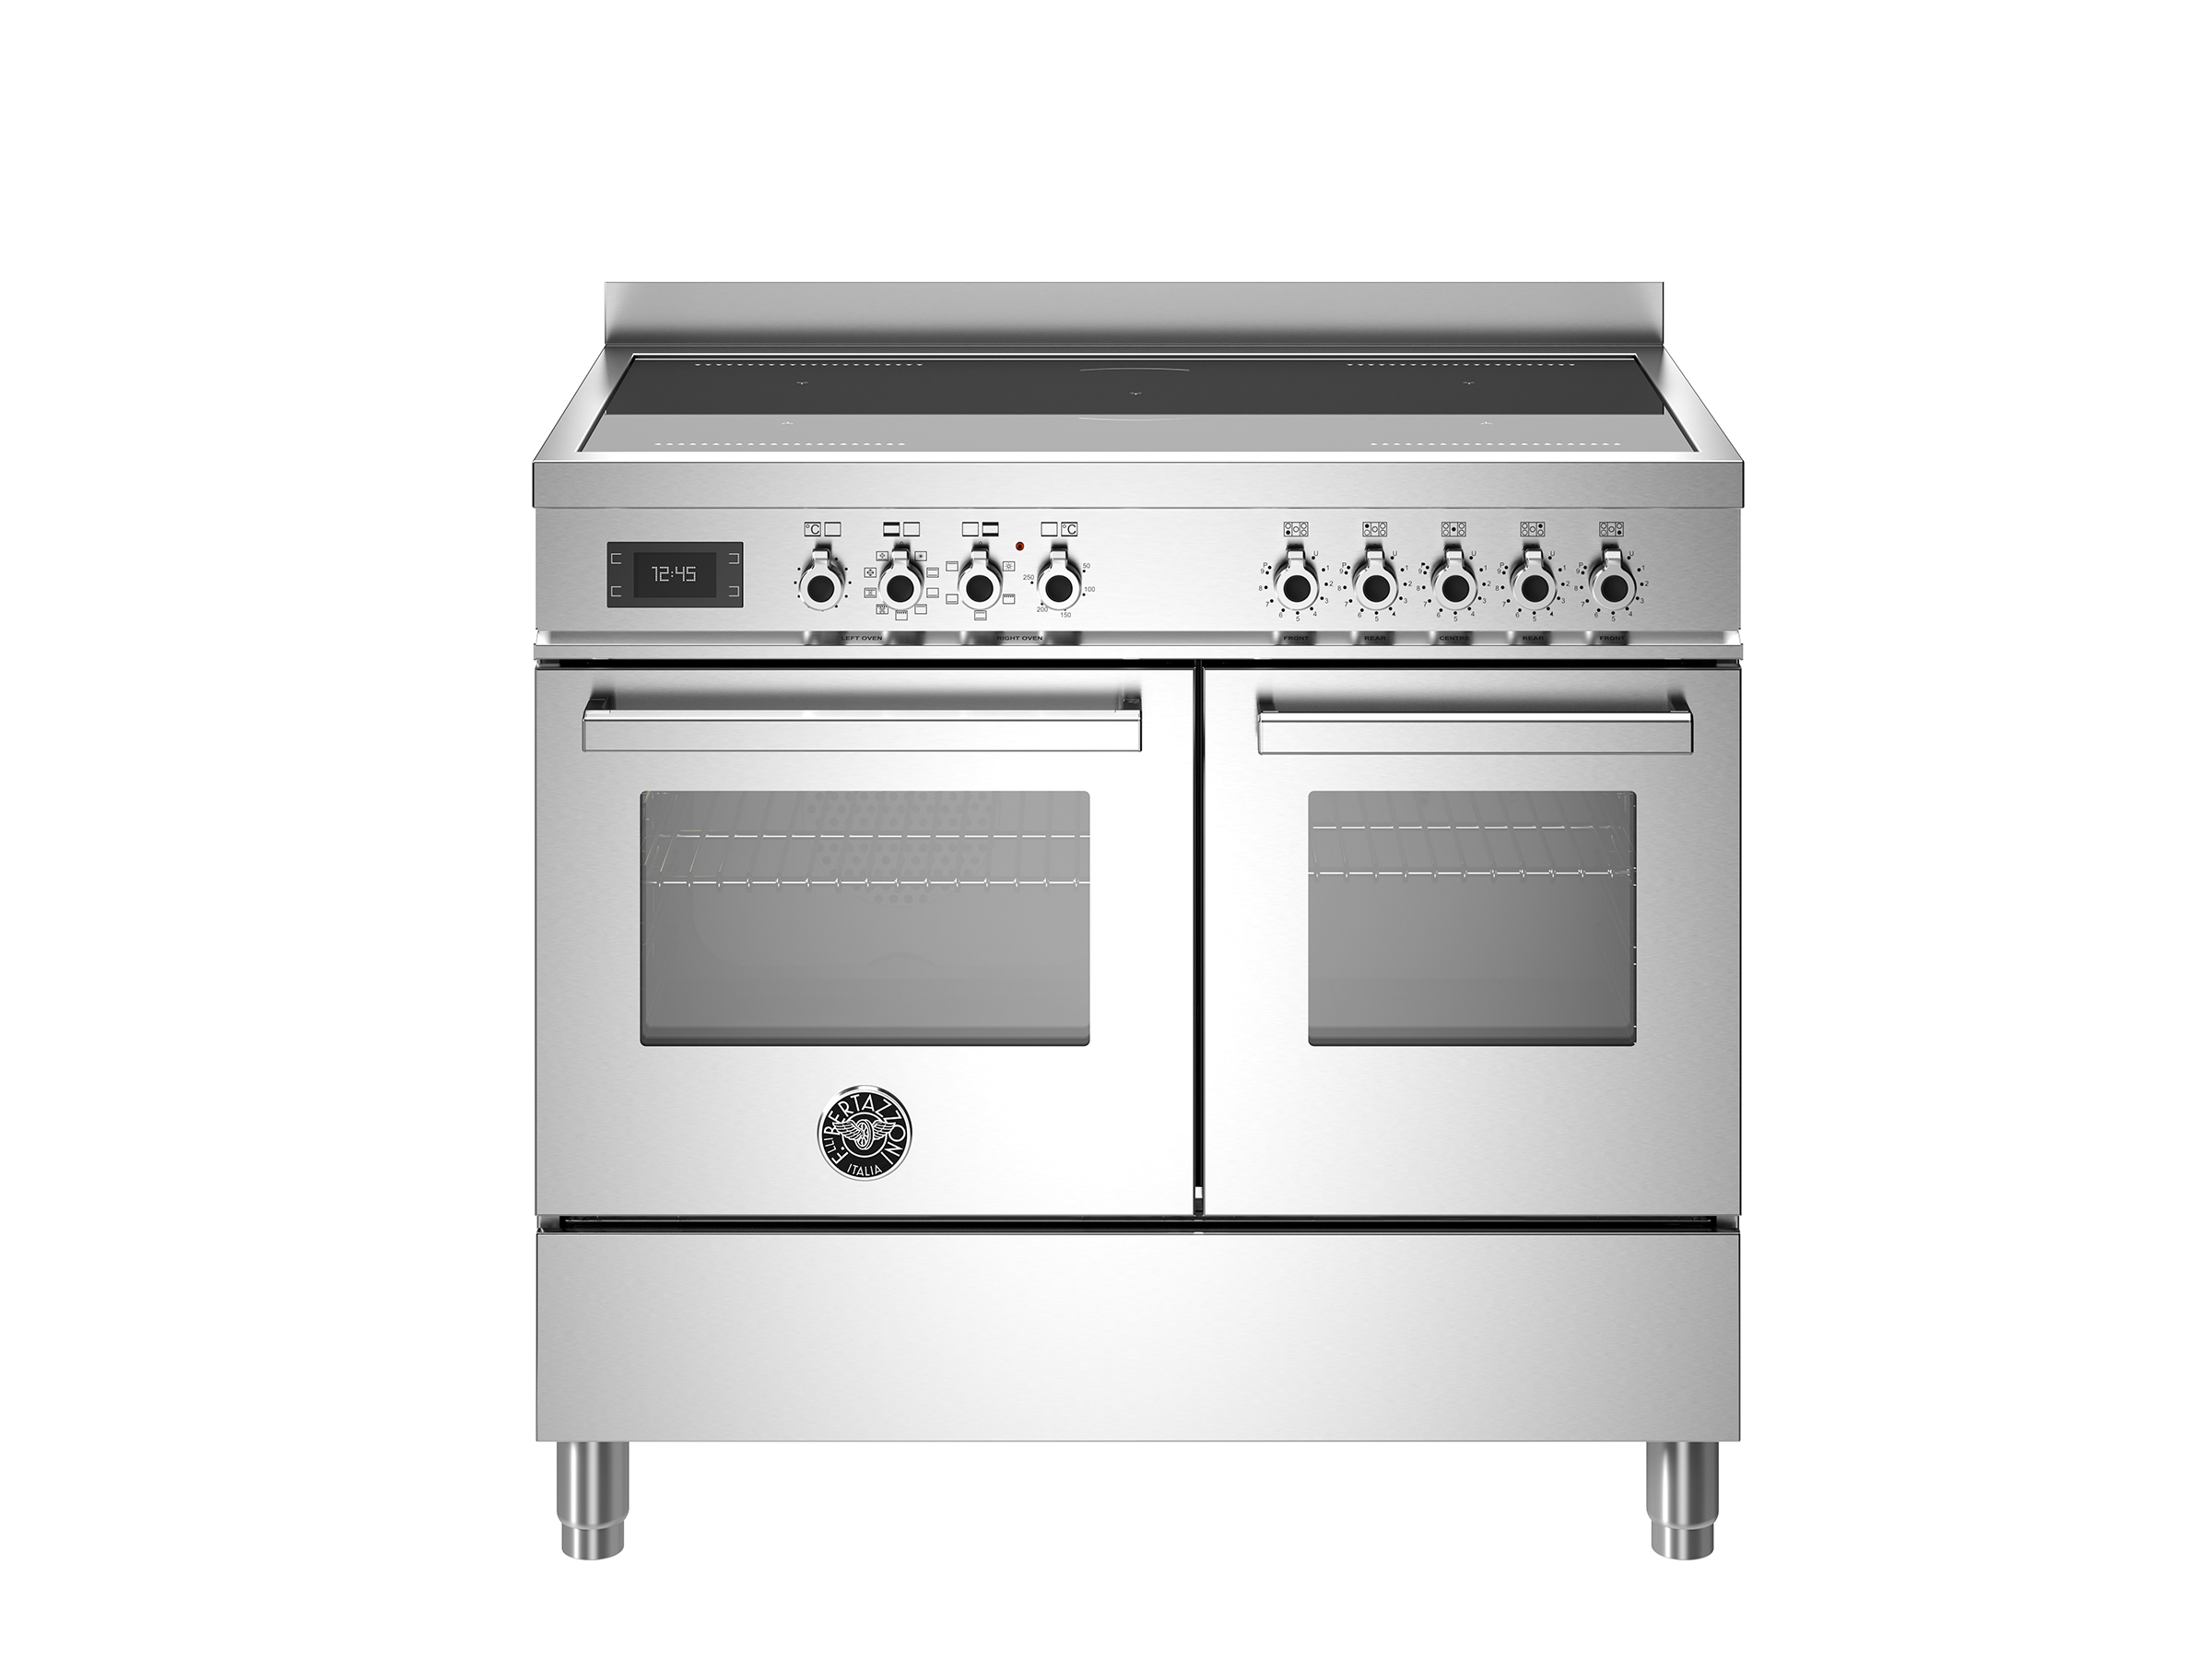 Berazzoni Professional 100 cm induction top electric double oven in Stainless Steel